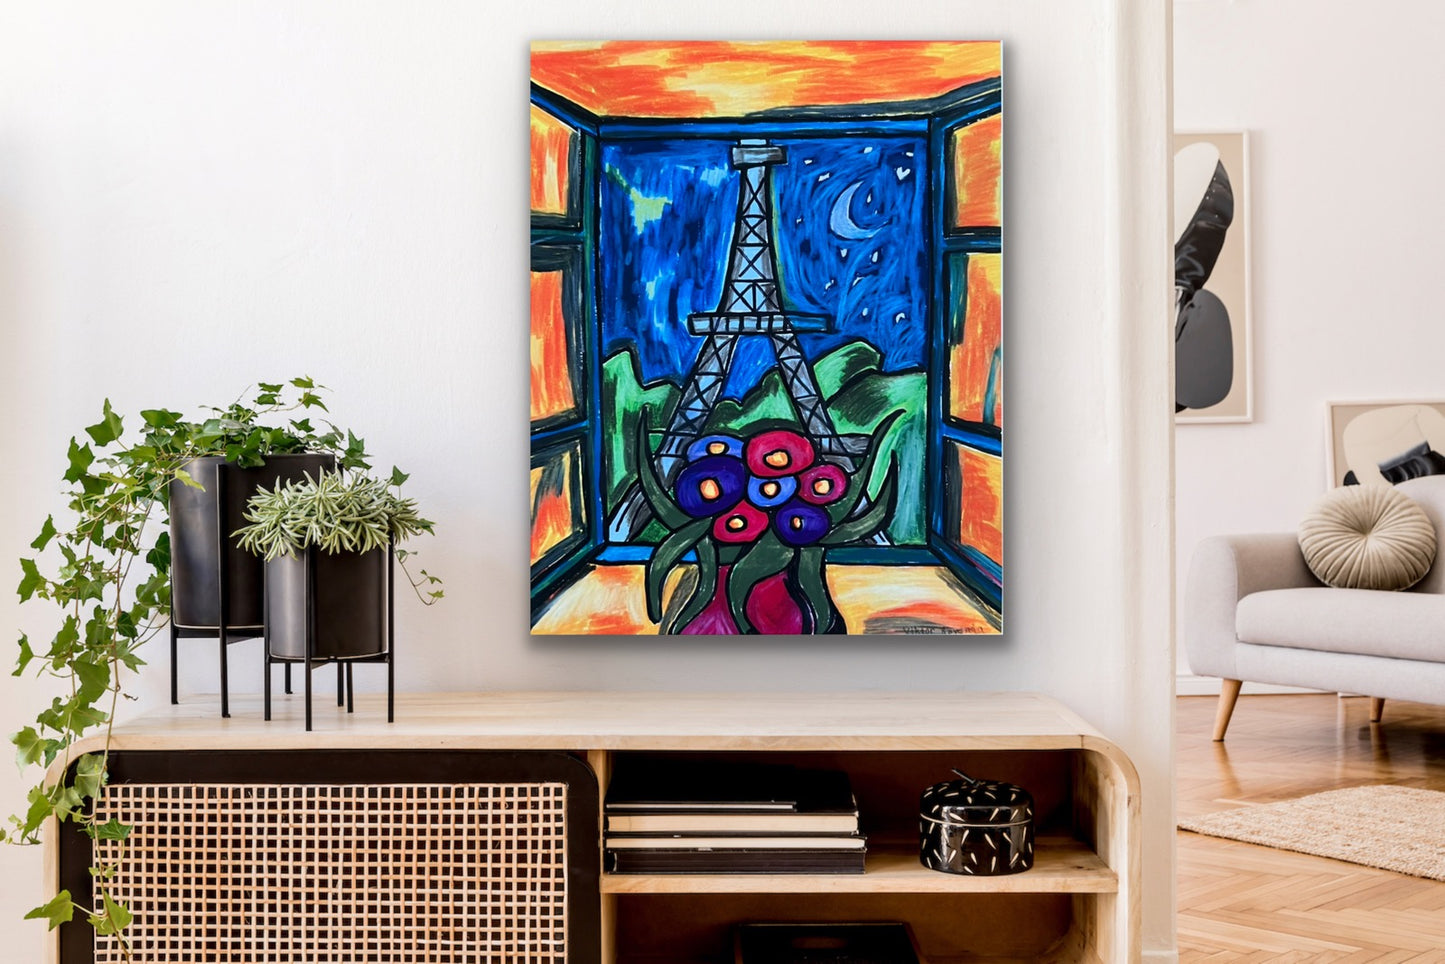 Paris (Eiffel Tower) - Stretched Canvas Print in more sizes